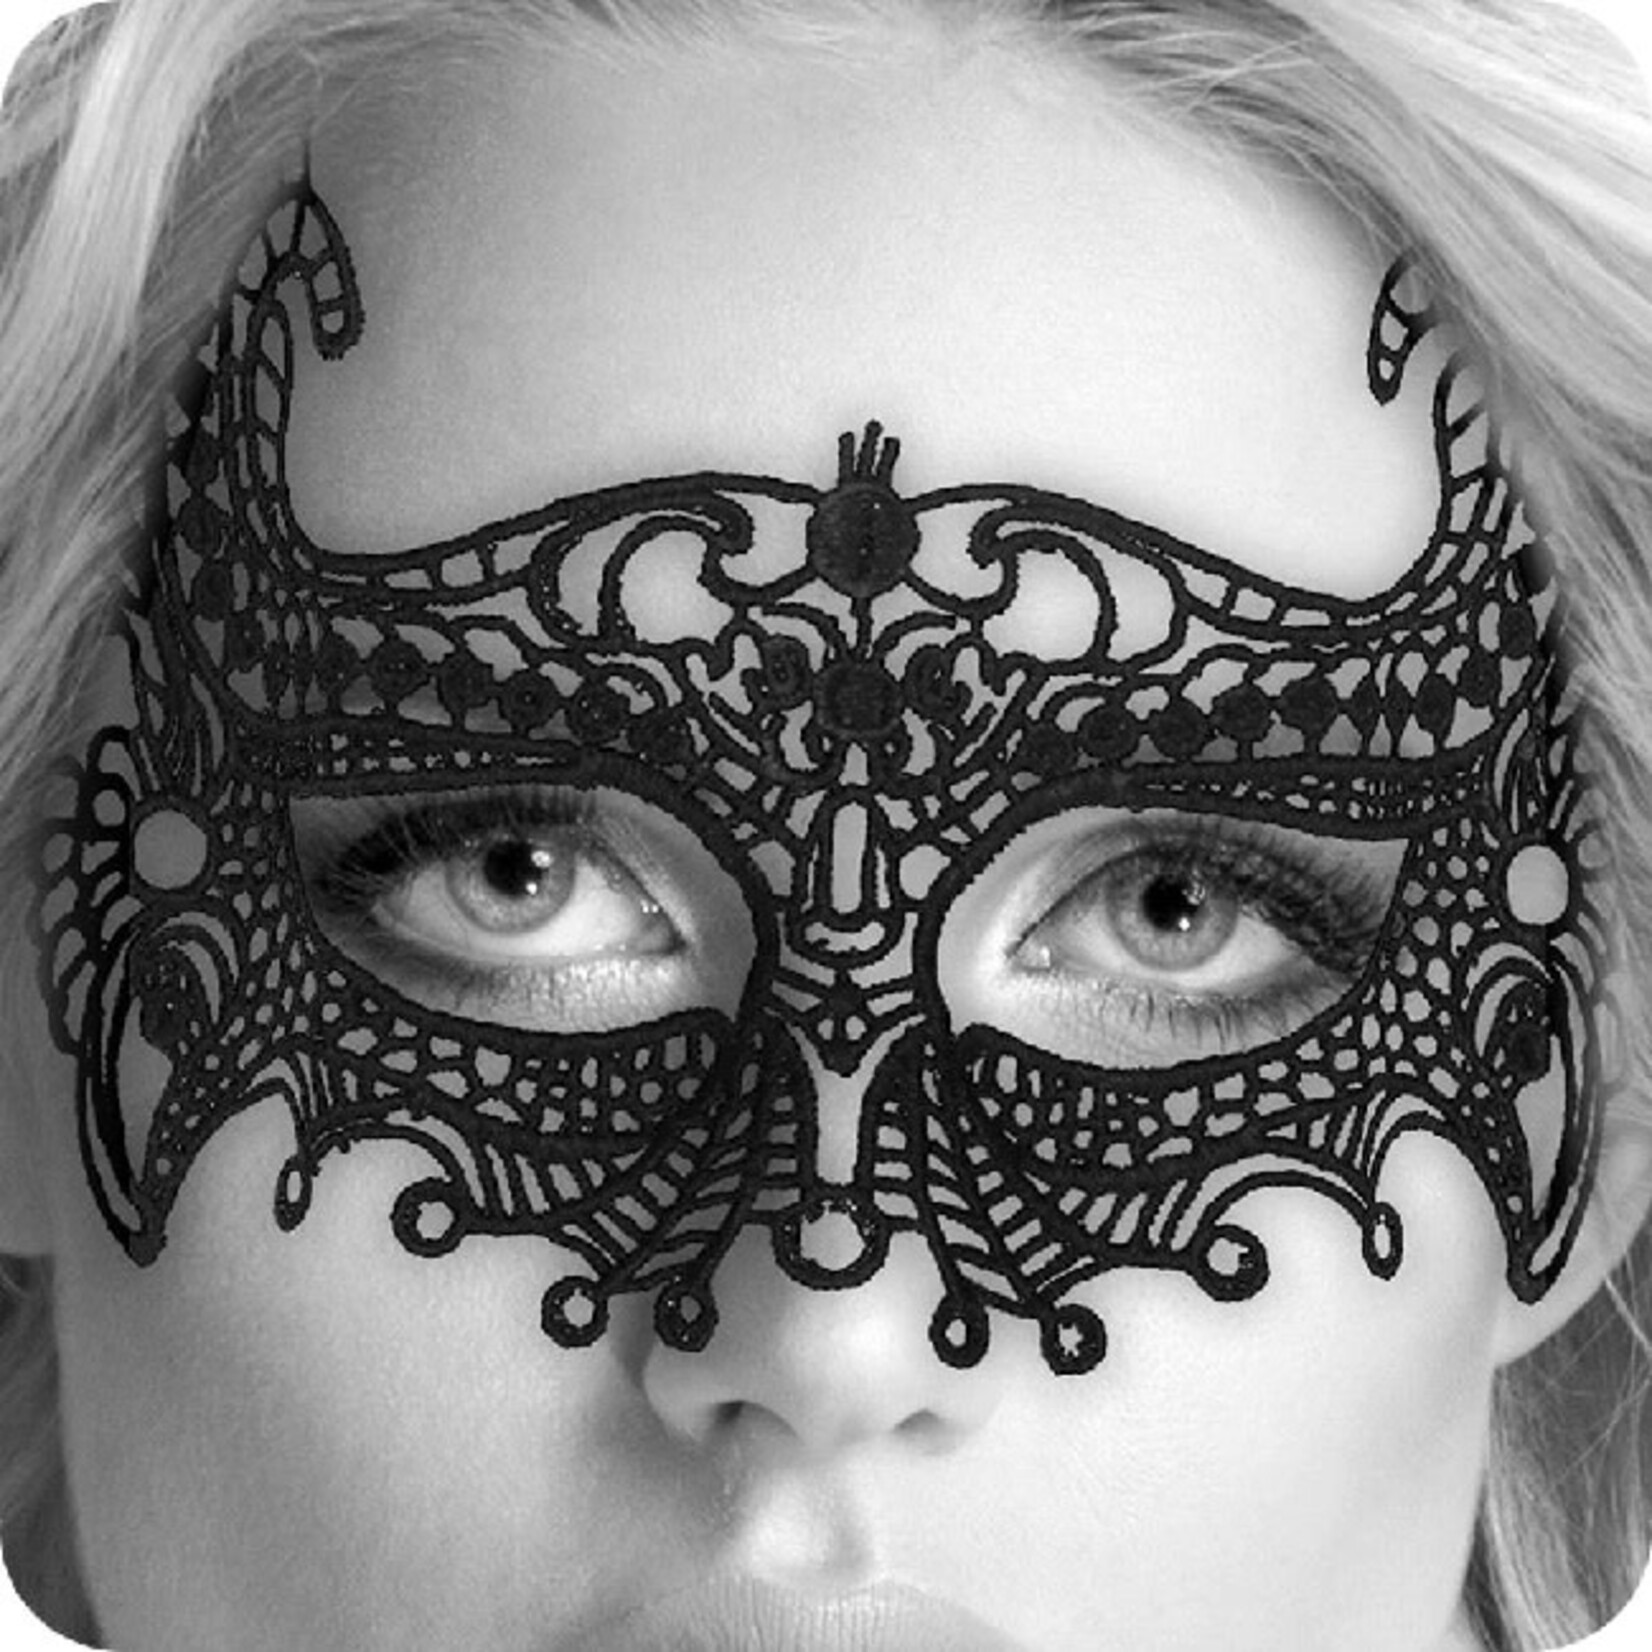 OUCH! OUCH! BLACK & WHITE LACE EMPRESS EYE-MASK